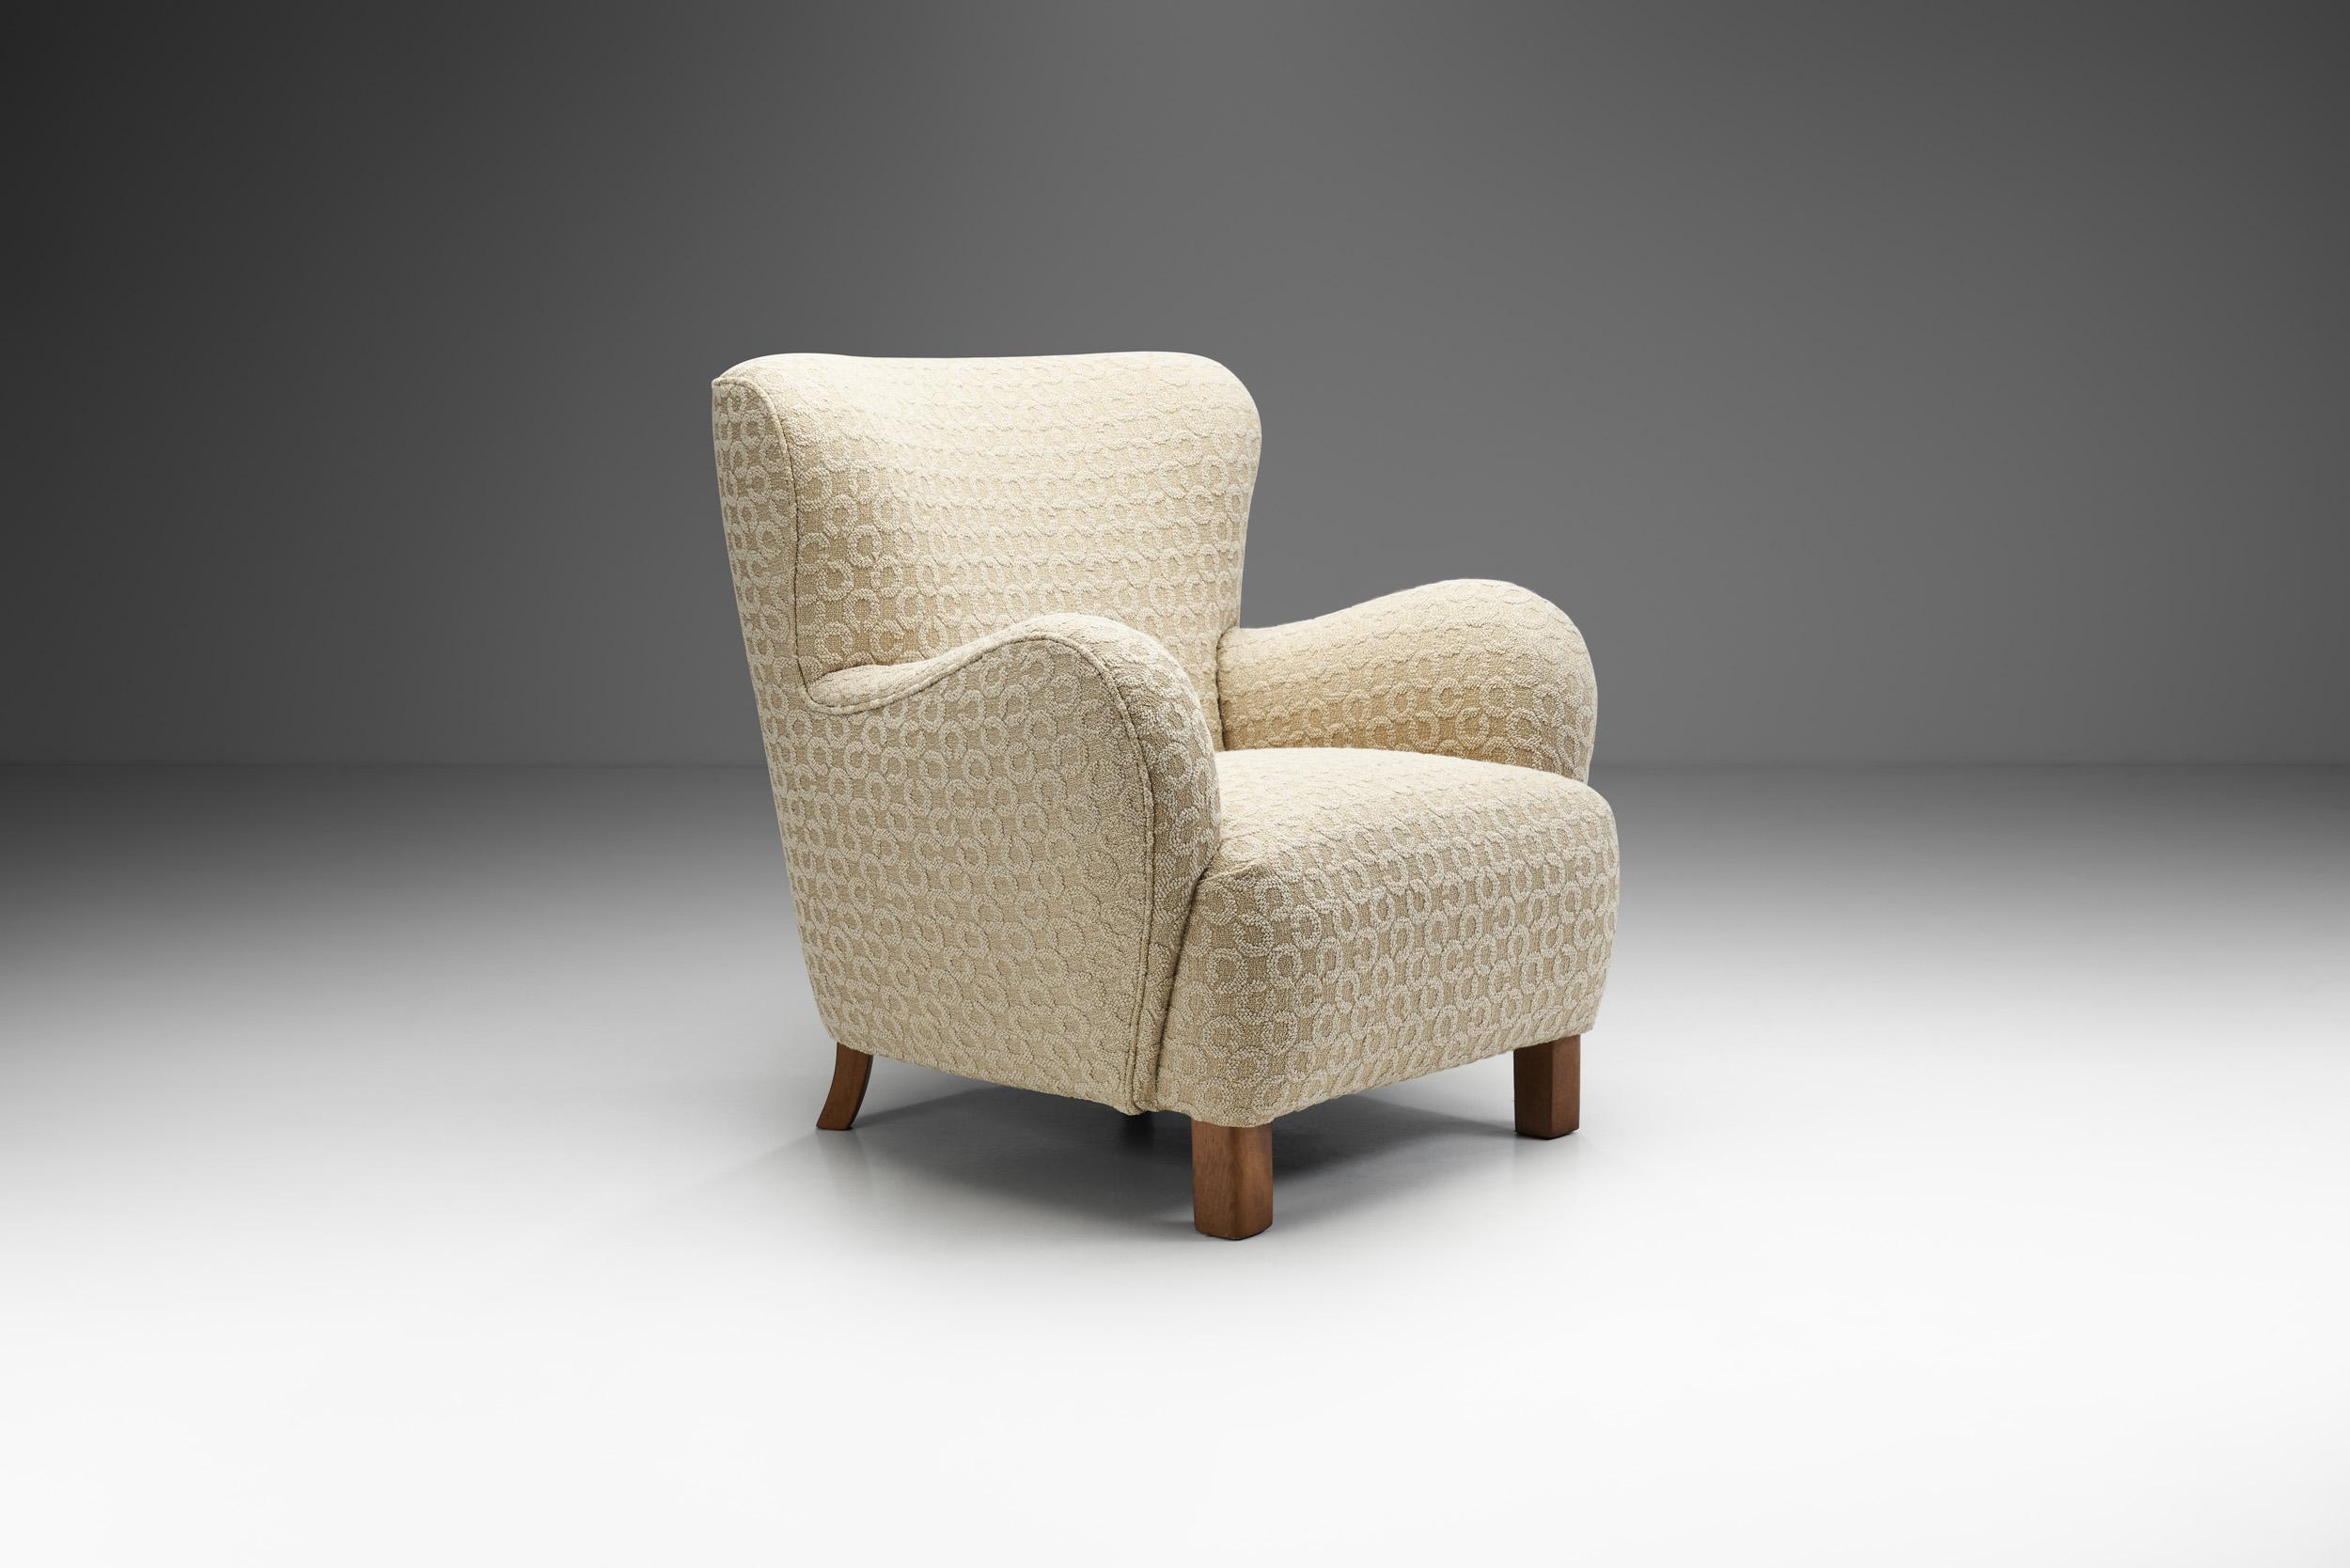 Mid-20th Century Danish Cabinetmaker Armchair with Patterned Upholstery, Denmark, 1940s For Sale